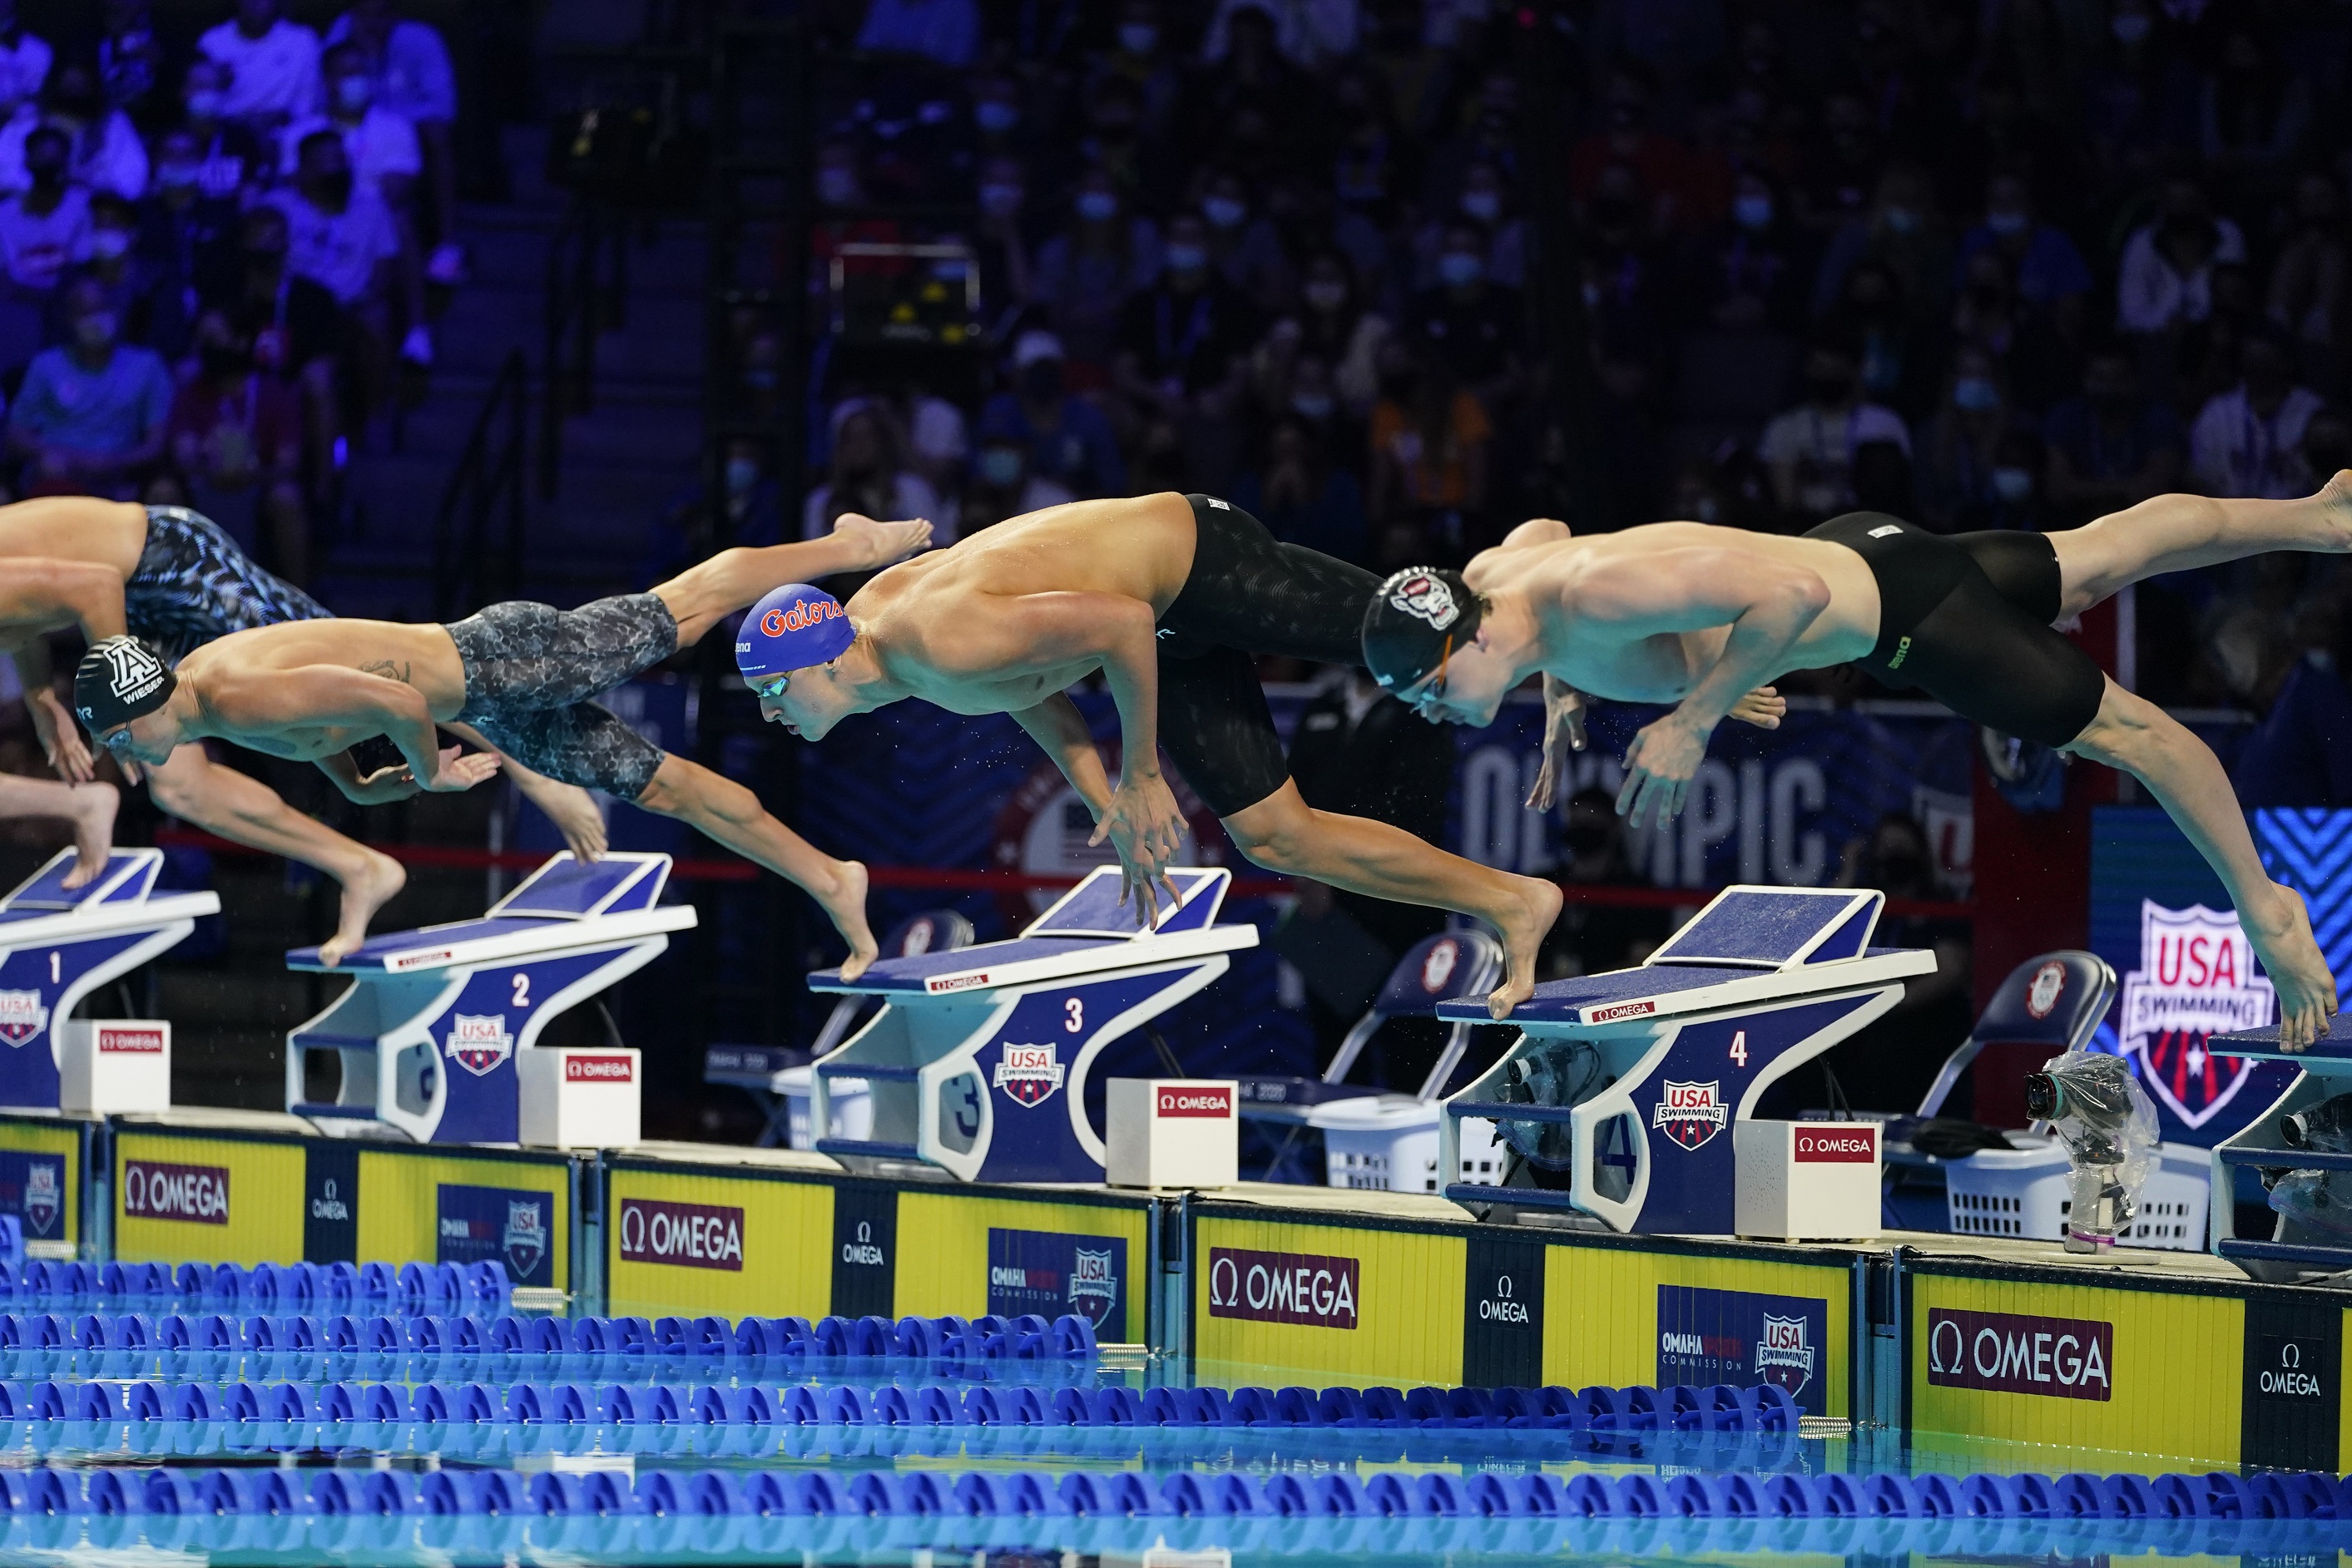 How to watch USA Olympic Swimming Trials 2021 Live stream, TV schedule